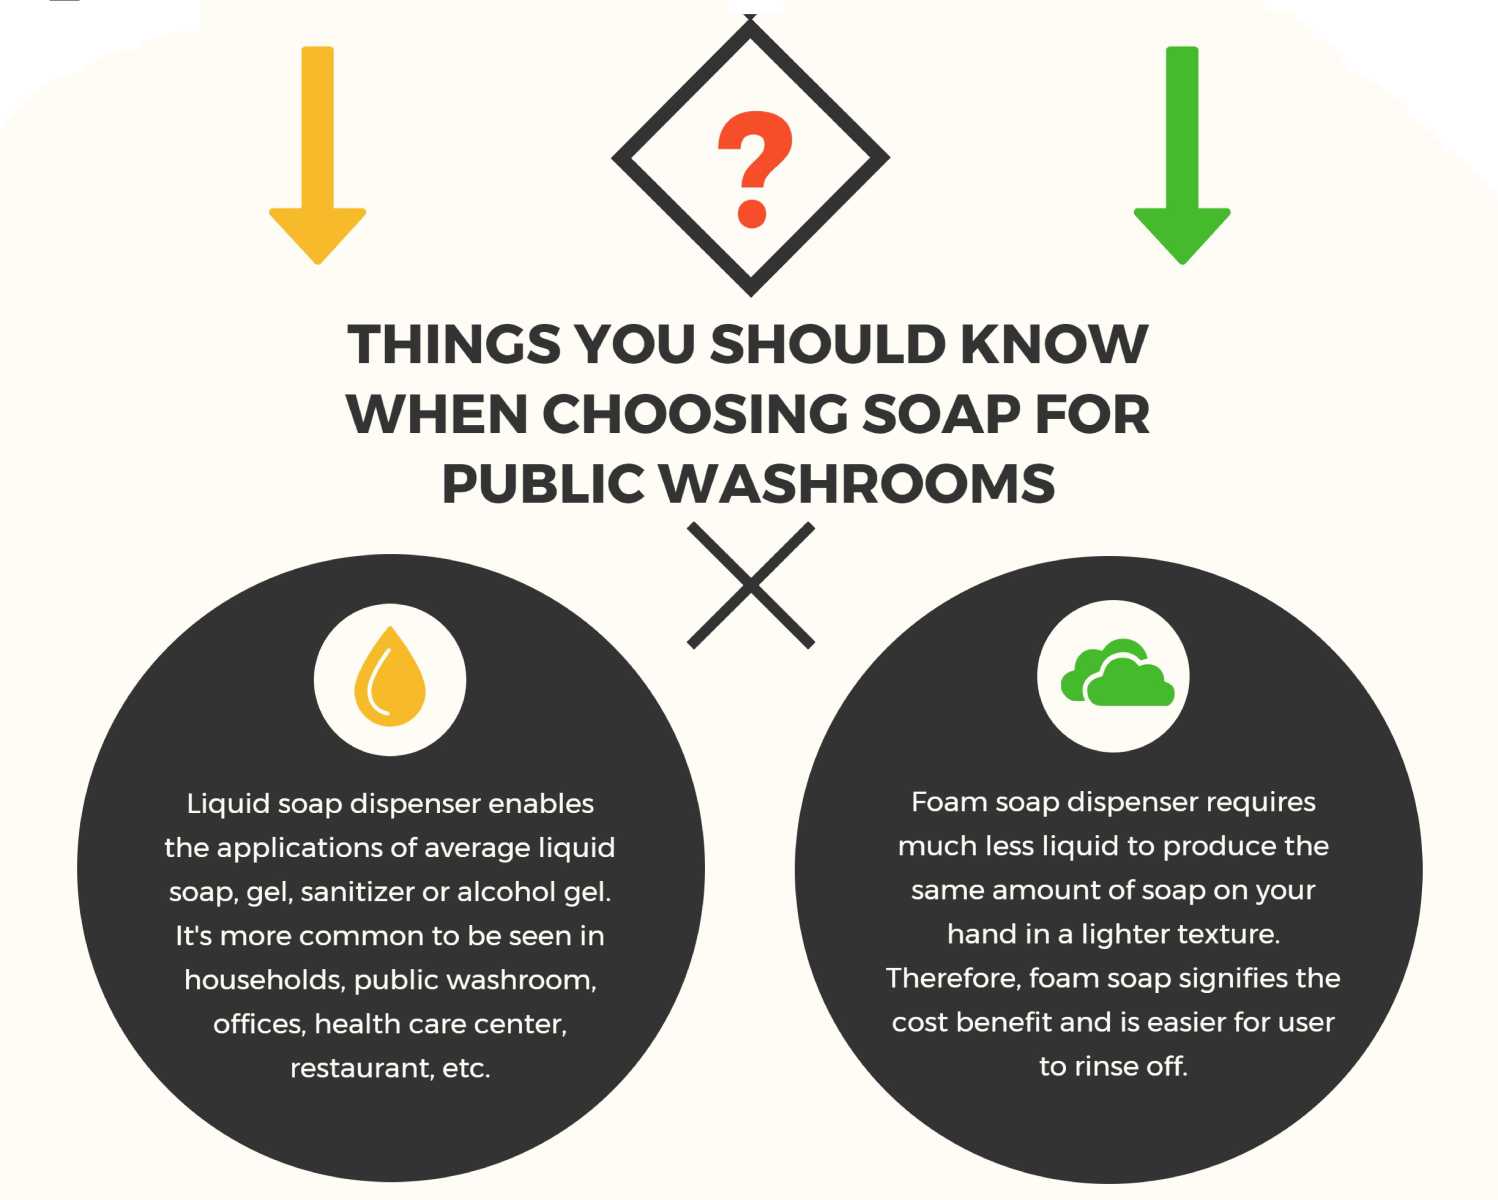 Let's see some advantages and shortcomings of liquid soap and foam soap.